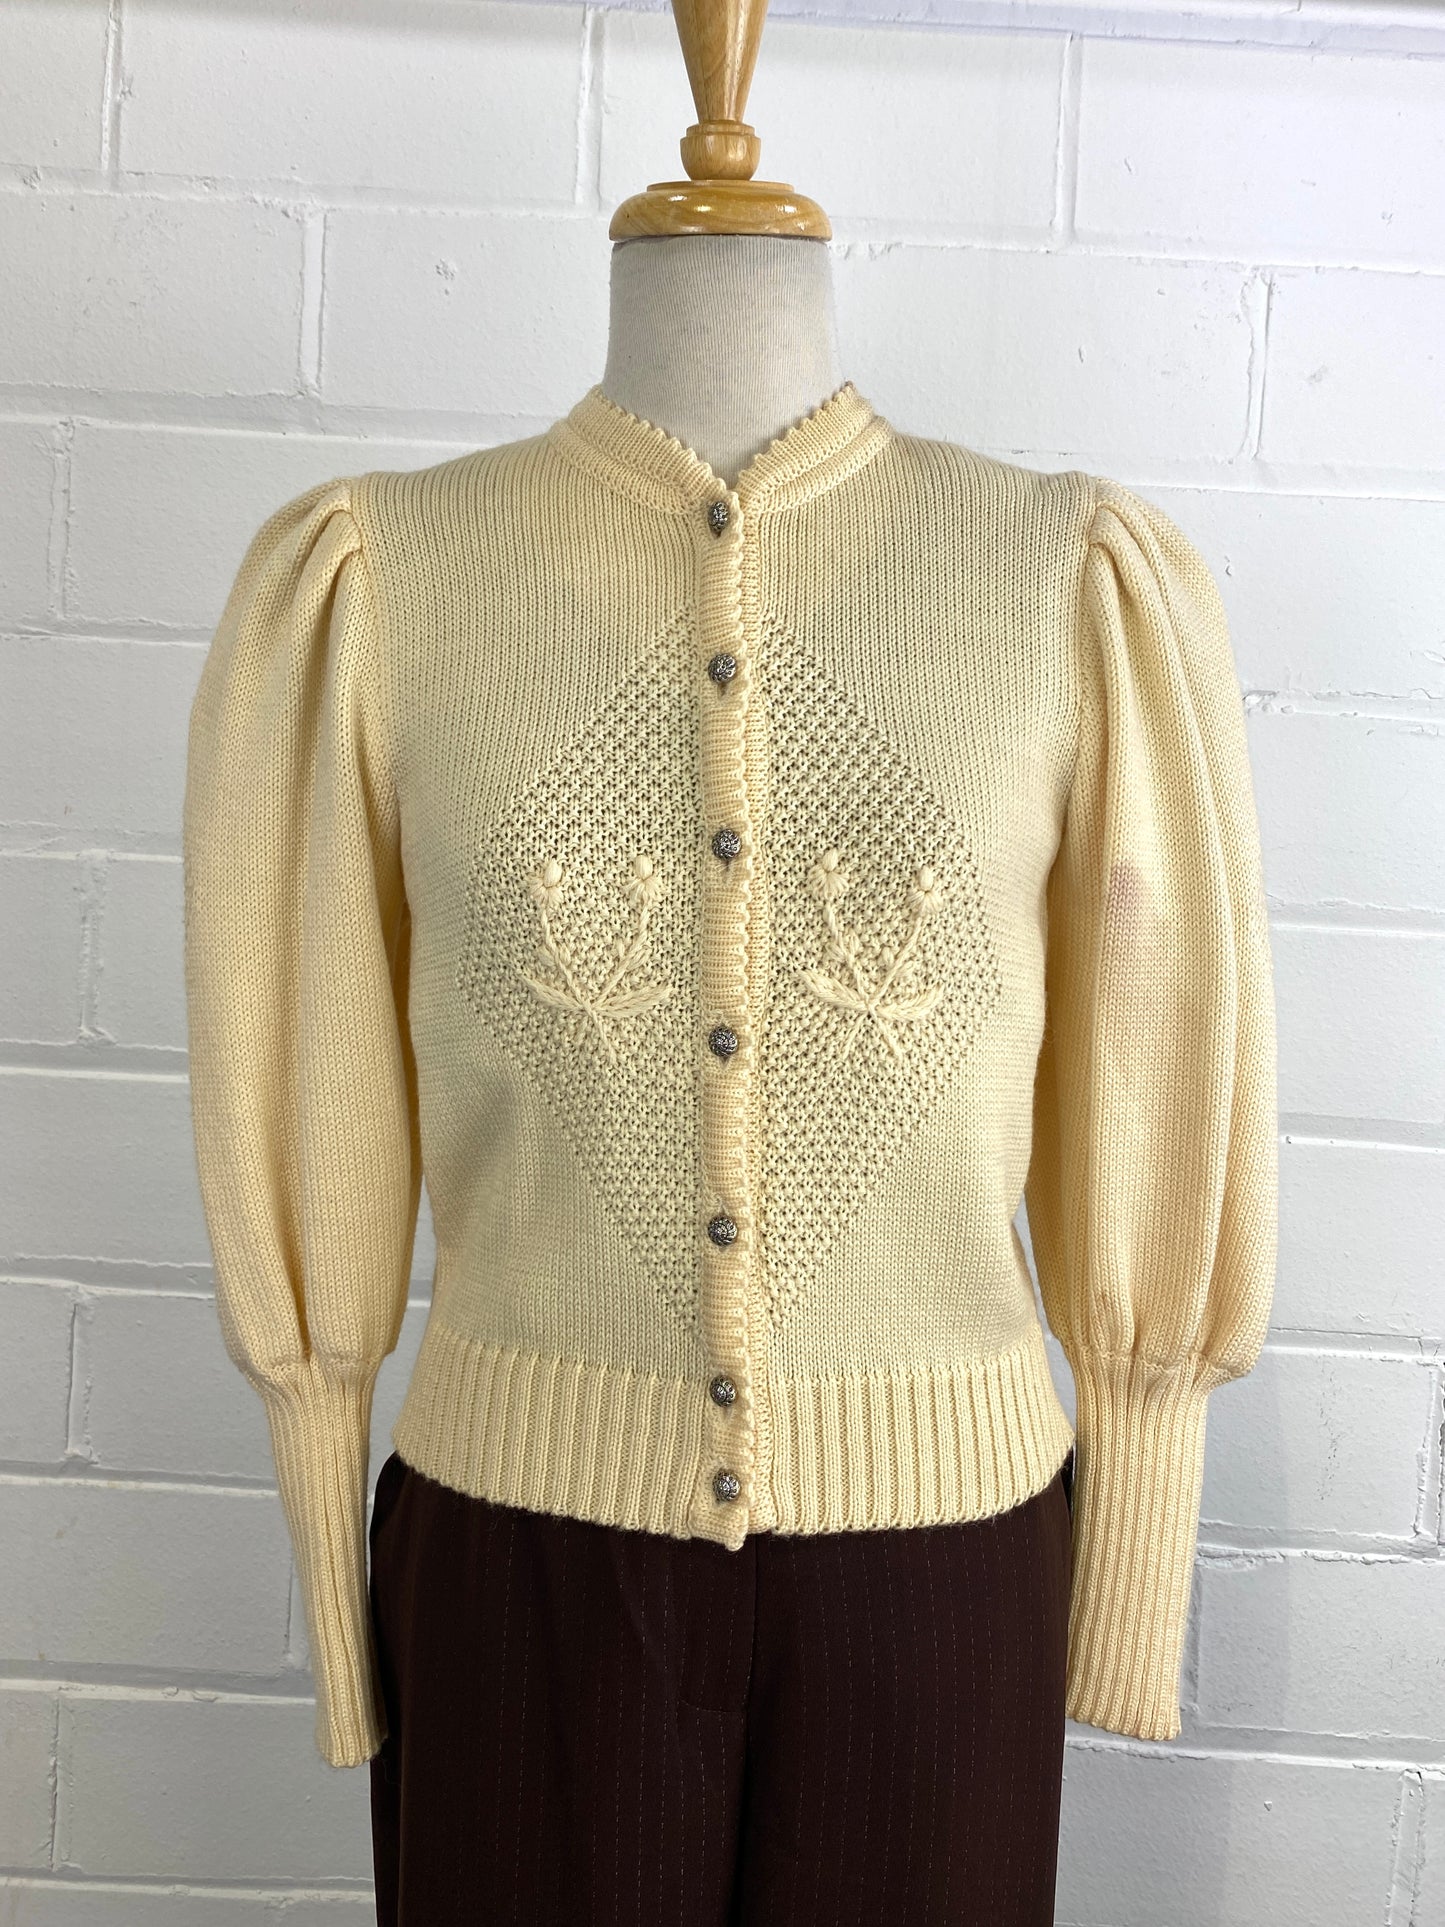 Vintage Deadstock Cream Austrian Wool Knit Puff Sleeve Cardigan with Floral Embroidery